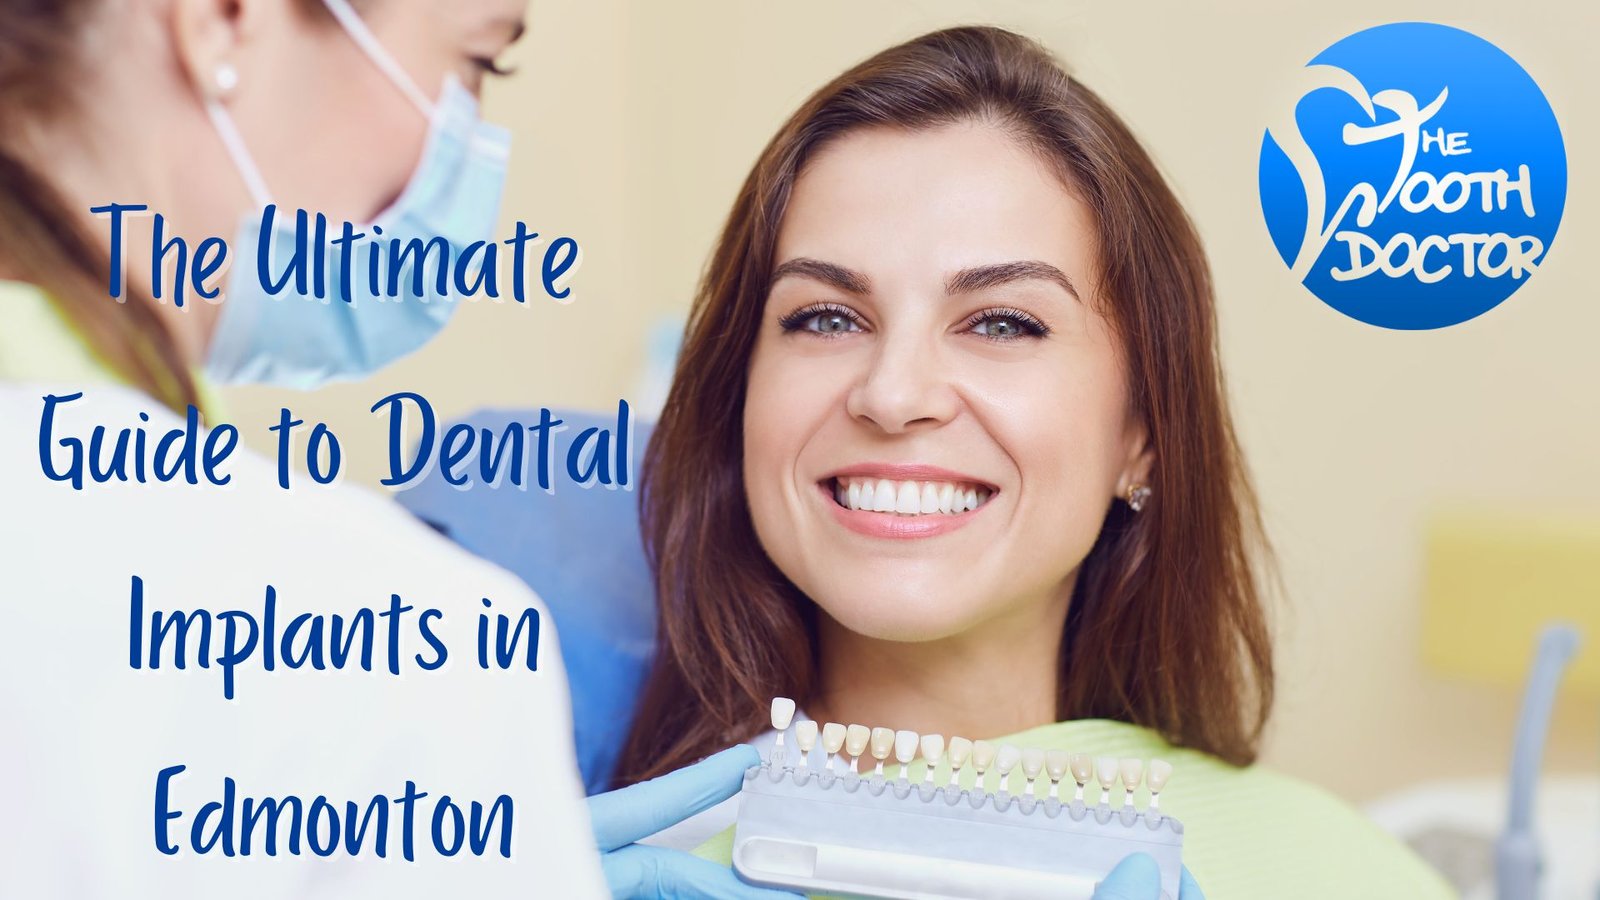 The Ultimate Guide to Dental Implants in Edmonton